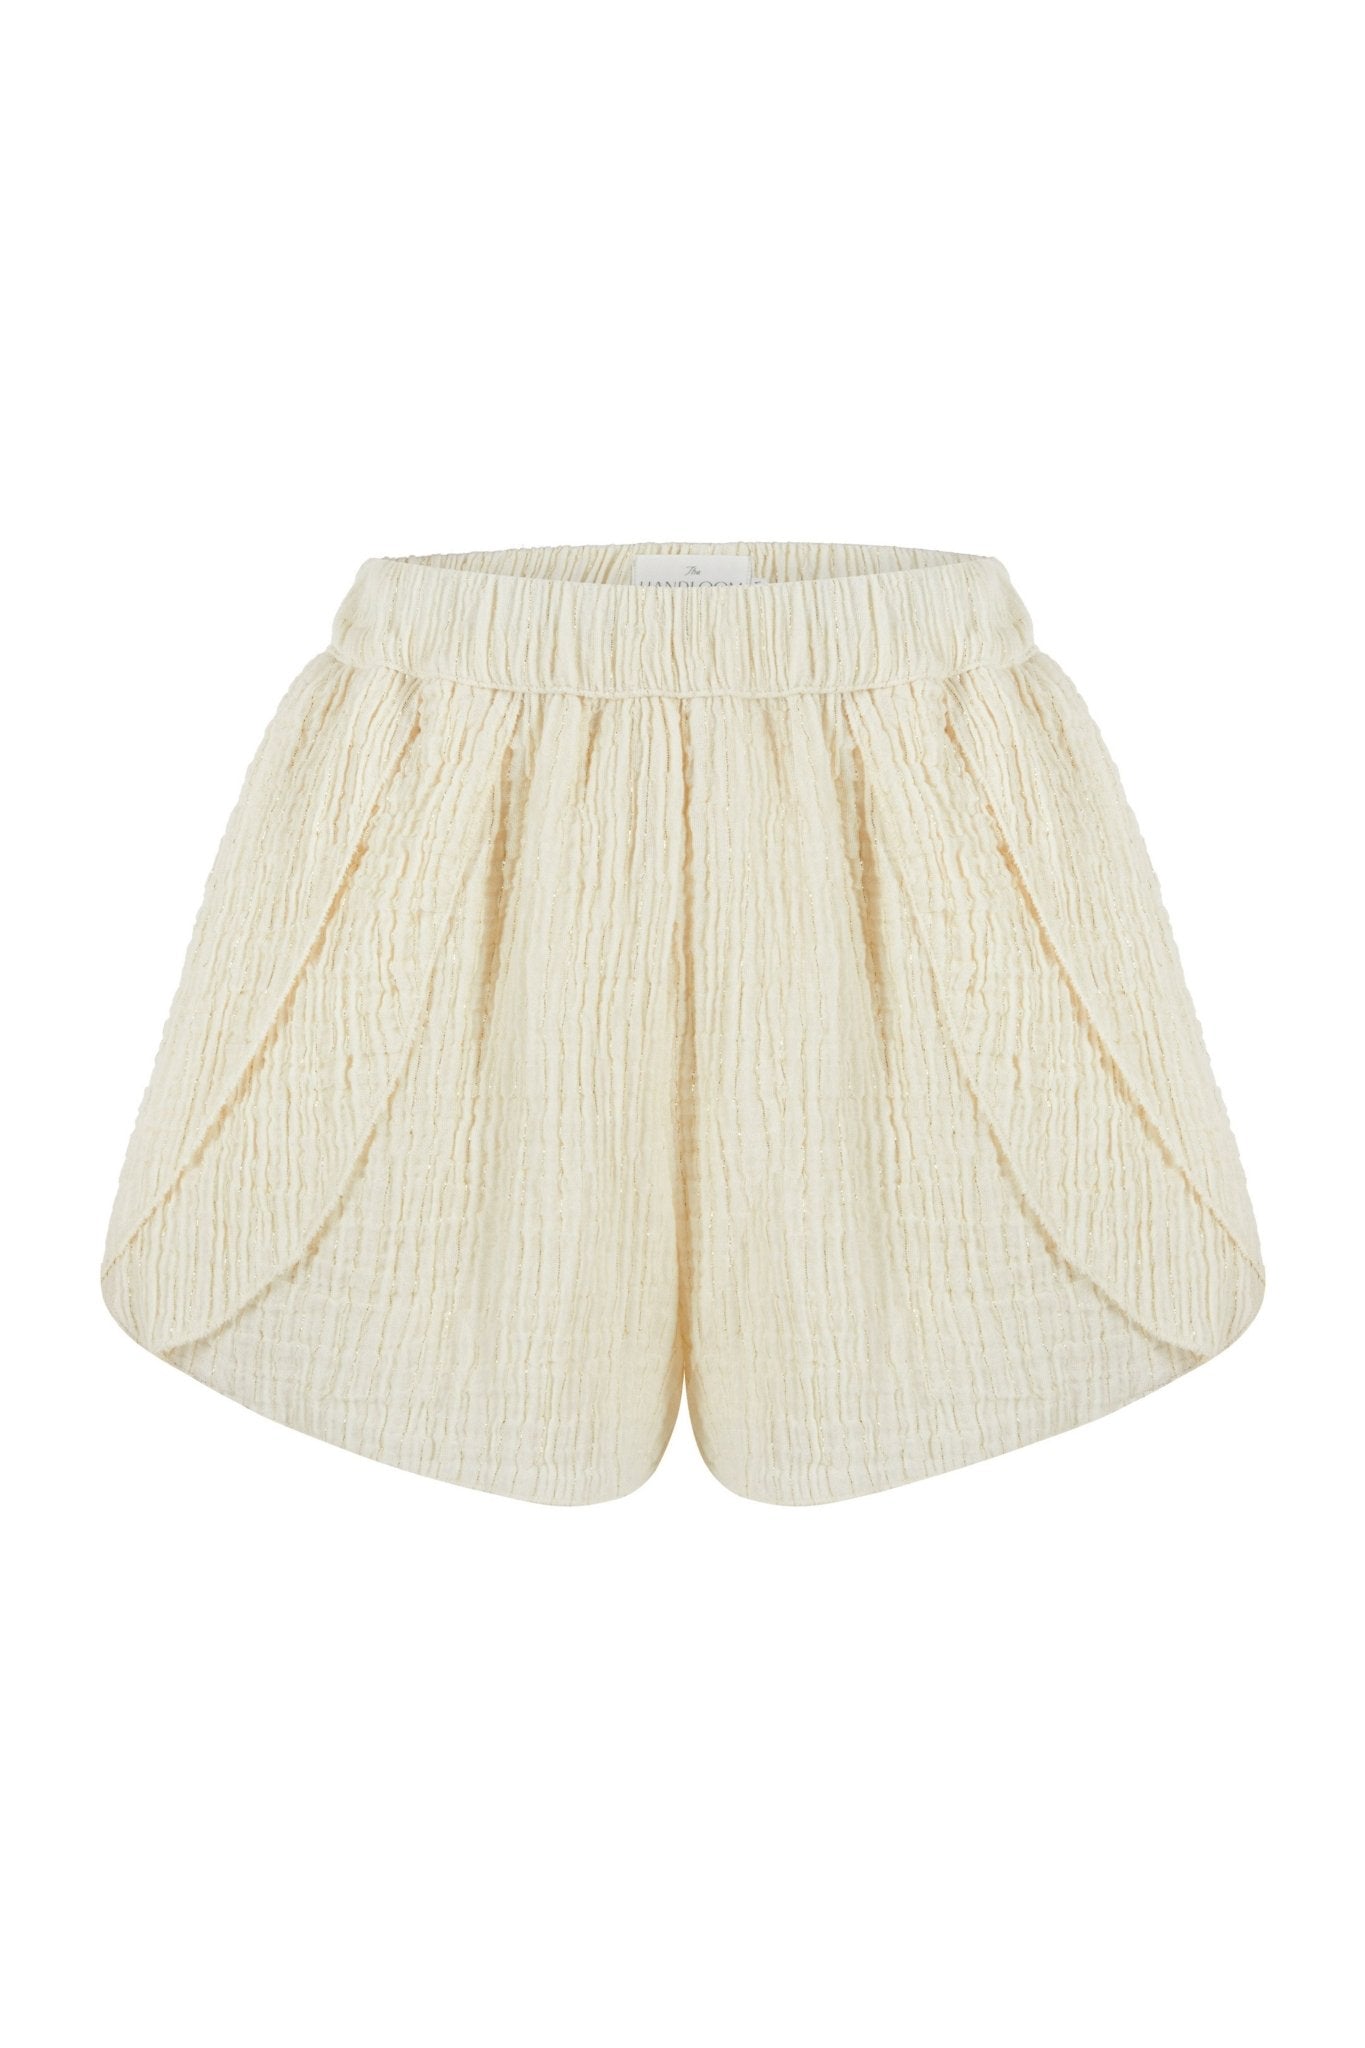 Mia Short - Natural with Gold Stripes by The Handloom